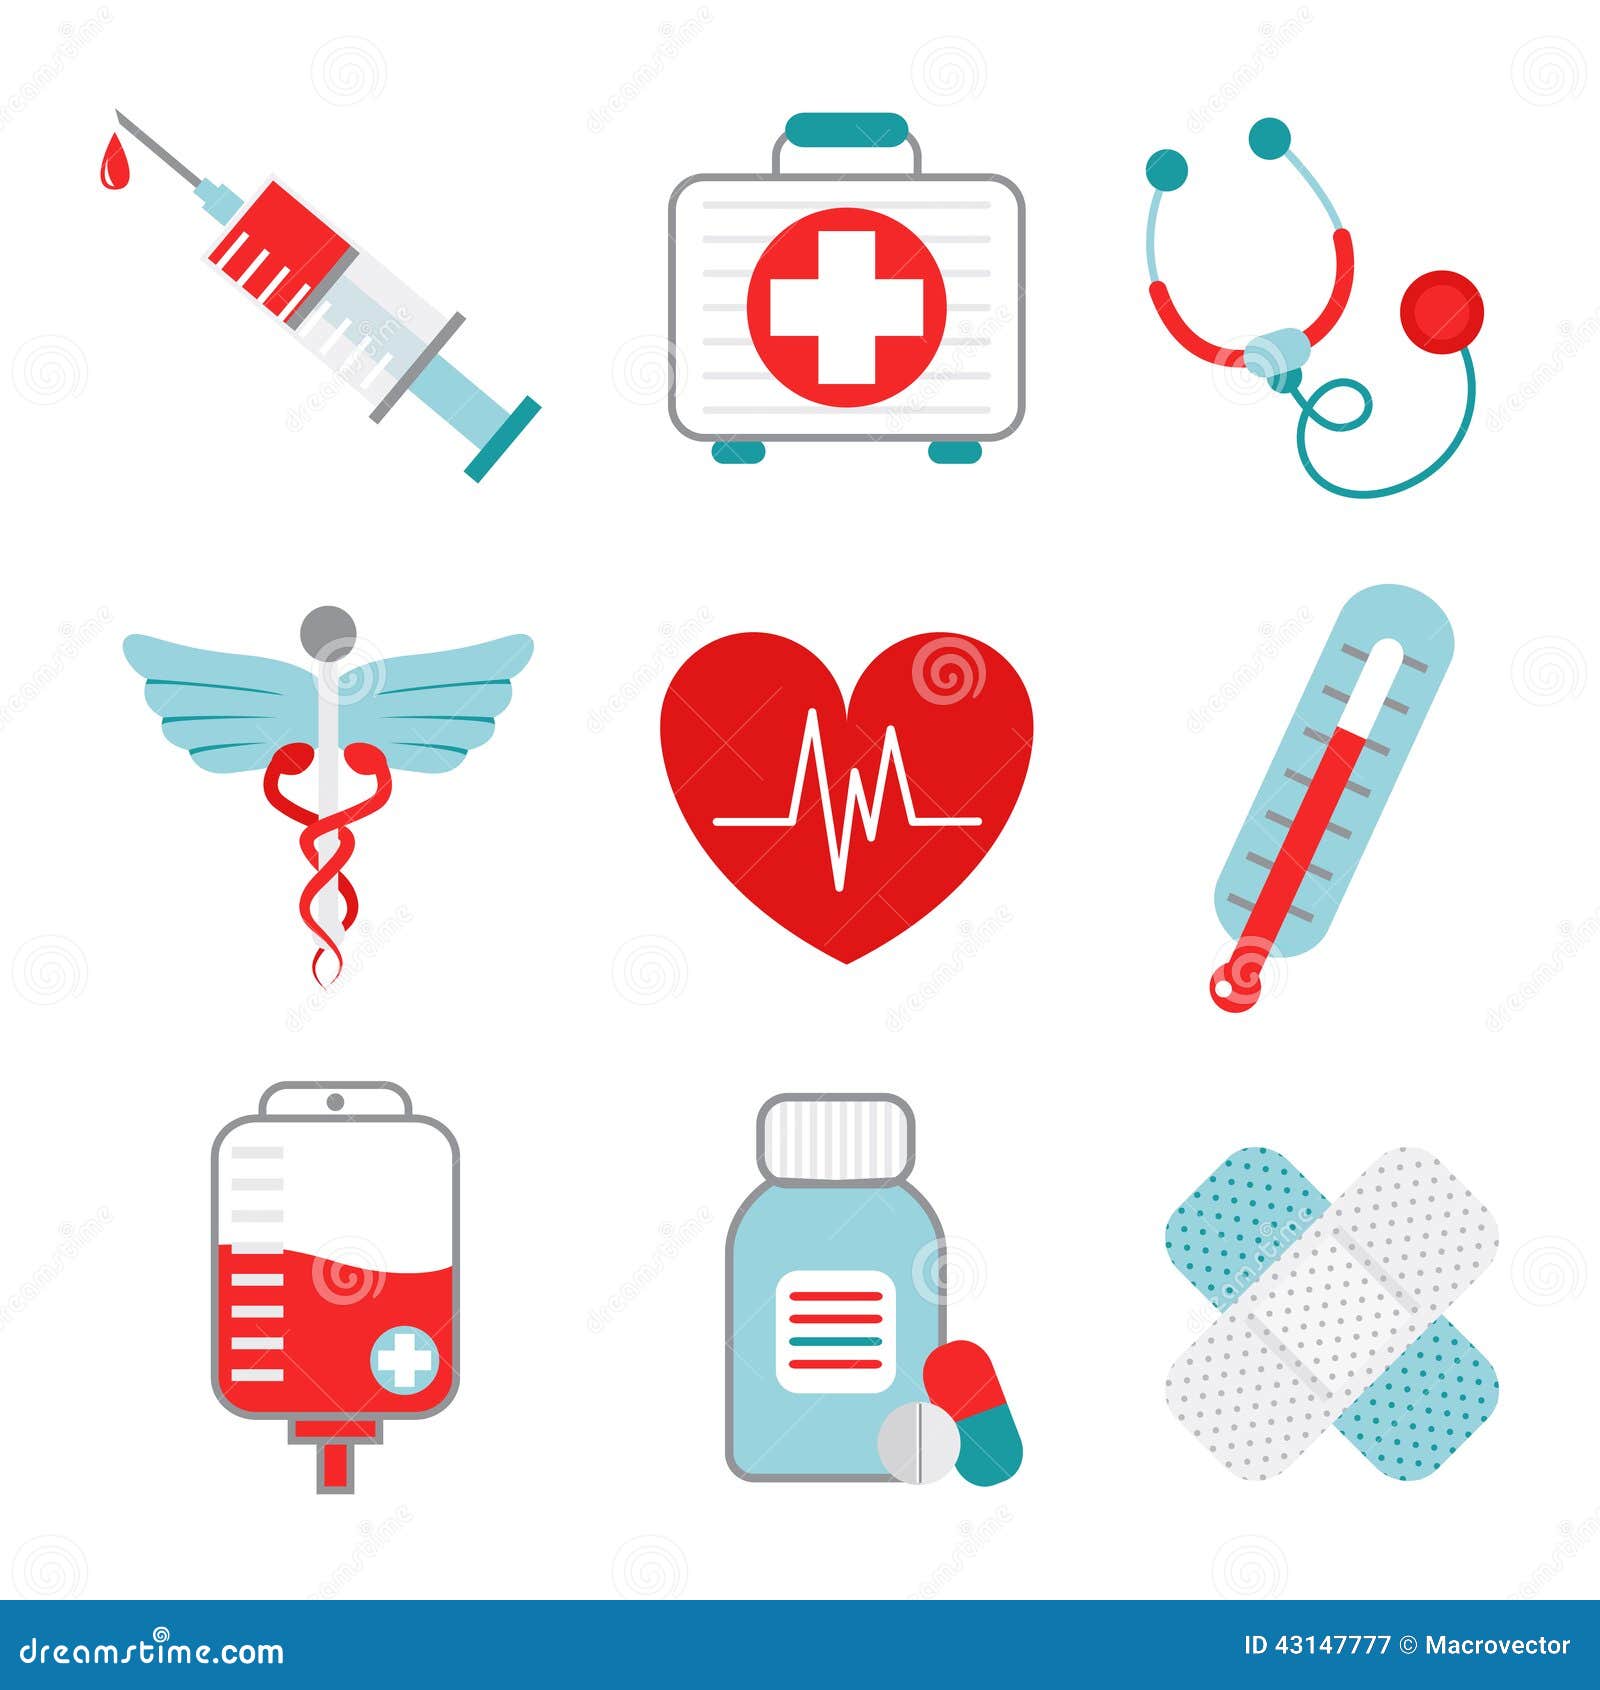 medical clipart collection - photo #45